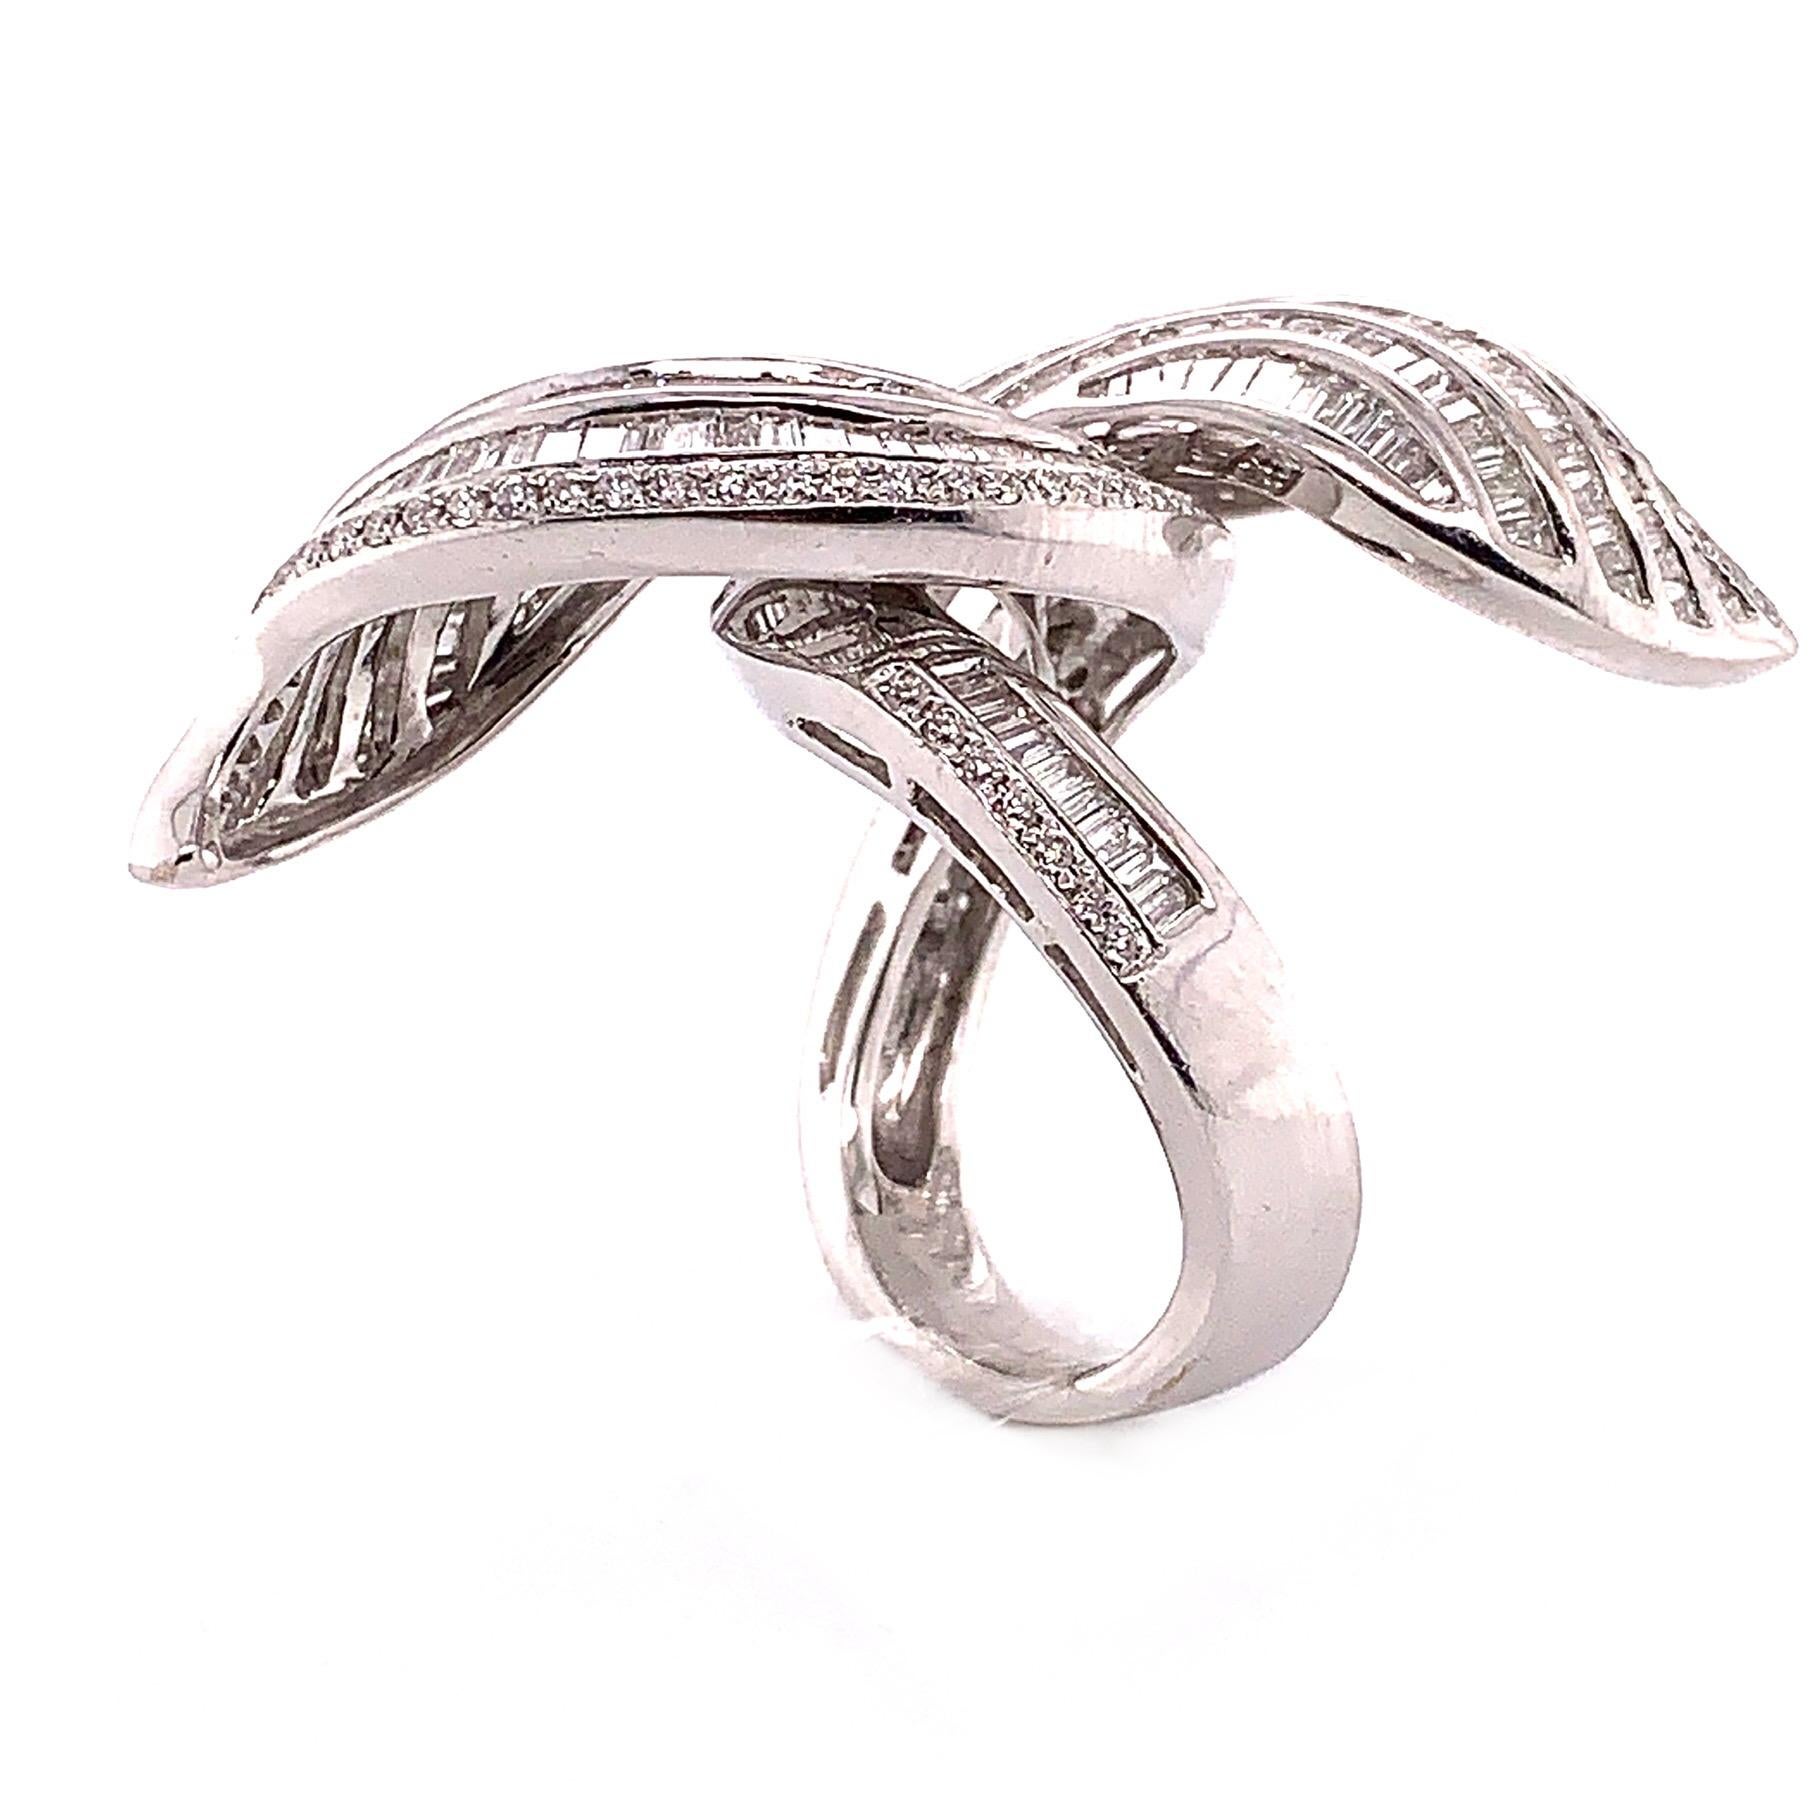 Contemporary 3.6 Carat Twirling Baguette Diamond Ring Crafted in 18 Karat White Gold